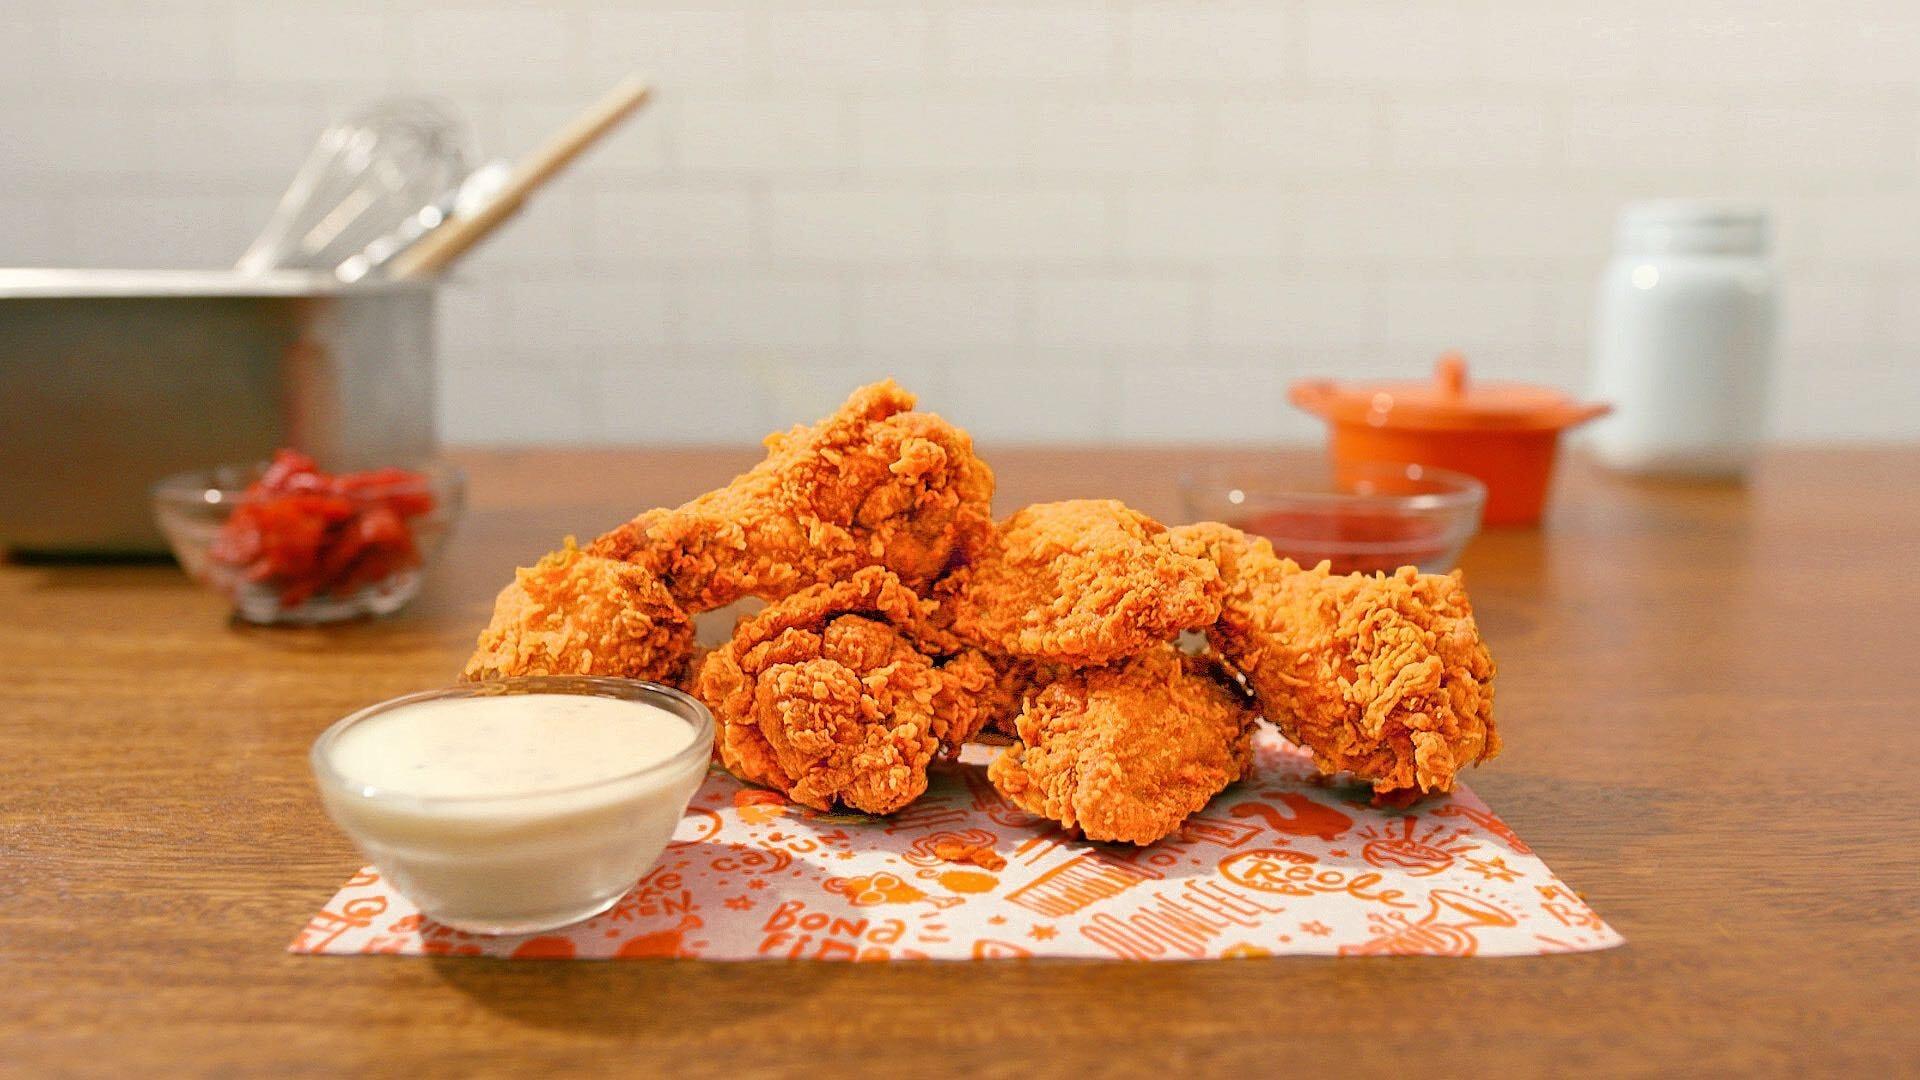 Get a free side with your pick-up or delivery order of Popeyes Ghost Pepper wings on Saturday, July 29, which is National Chicken Wing Day.